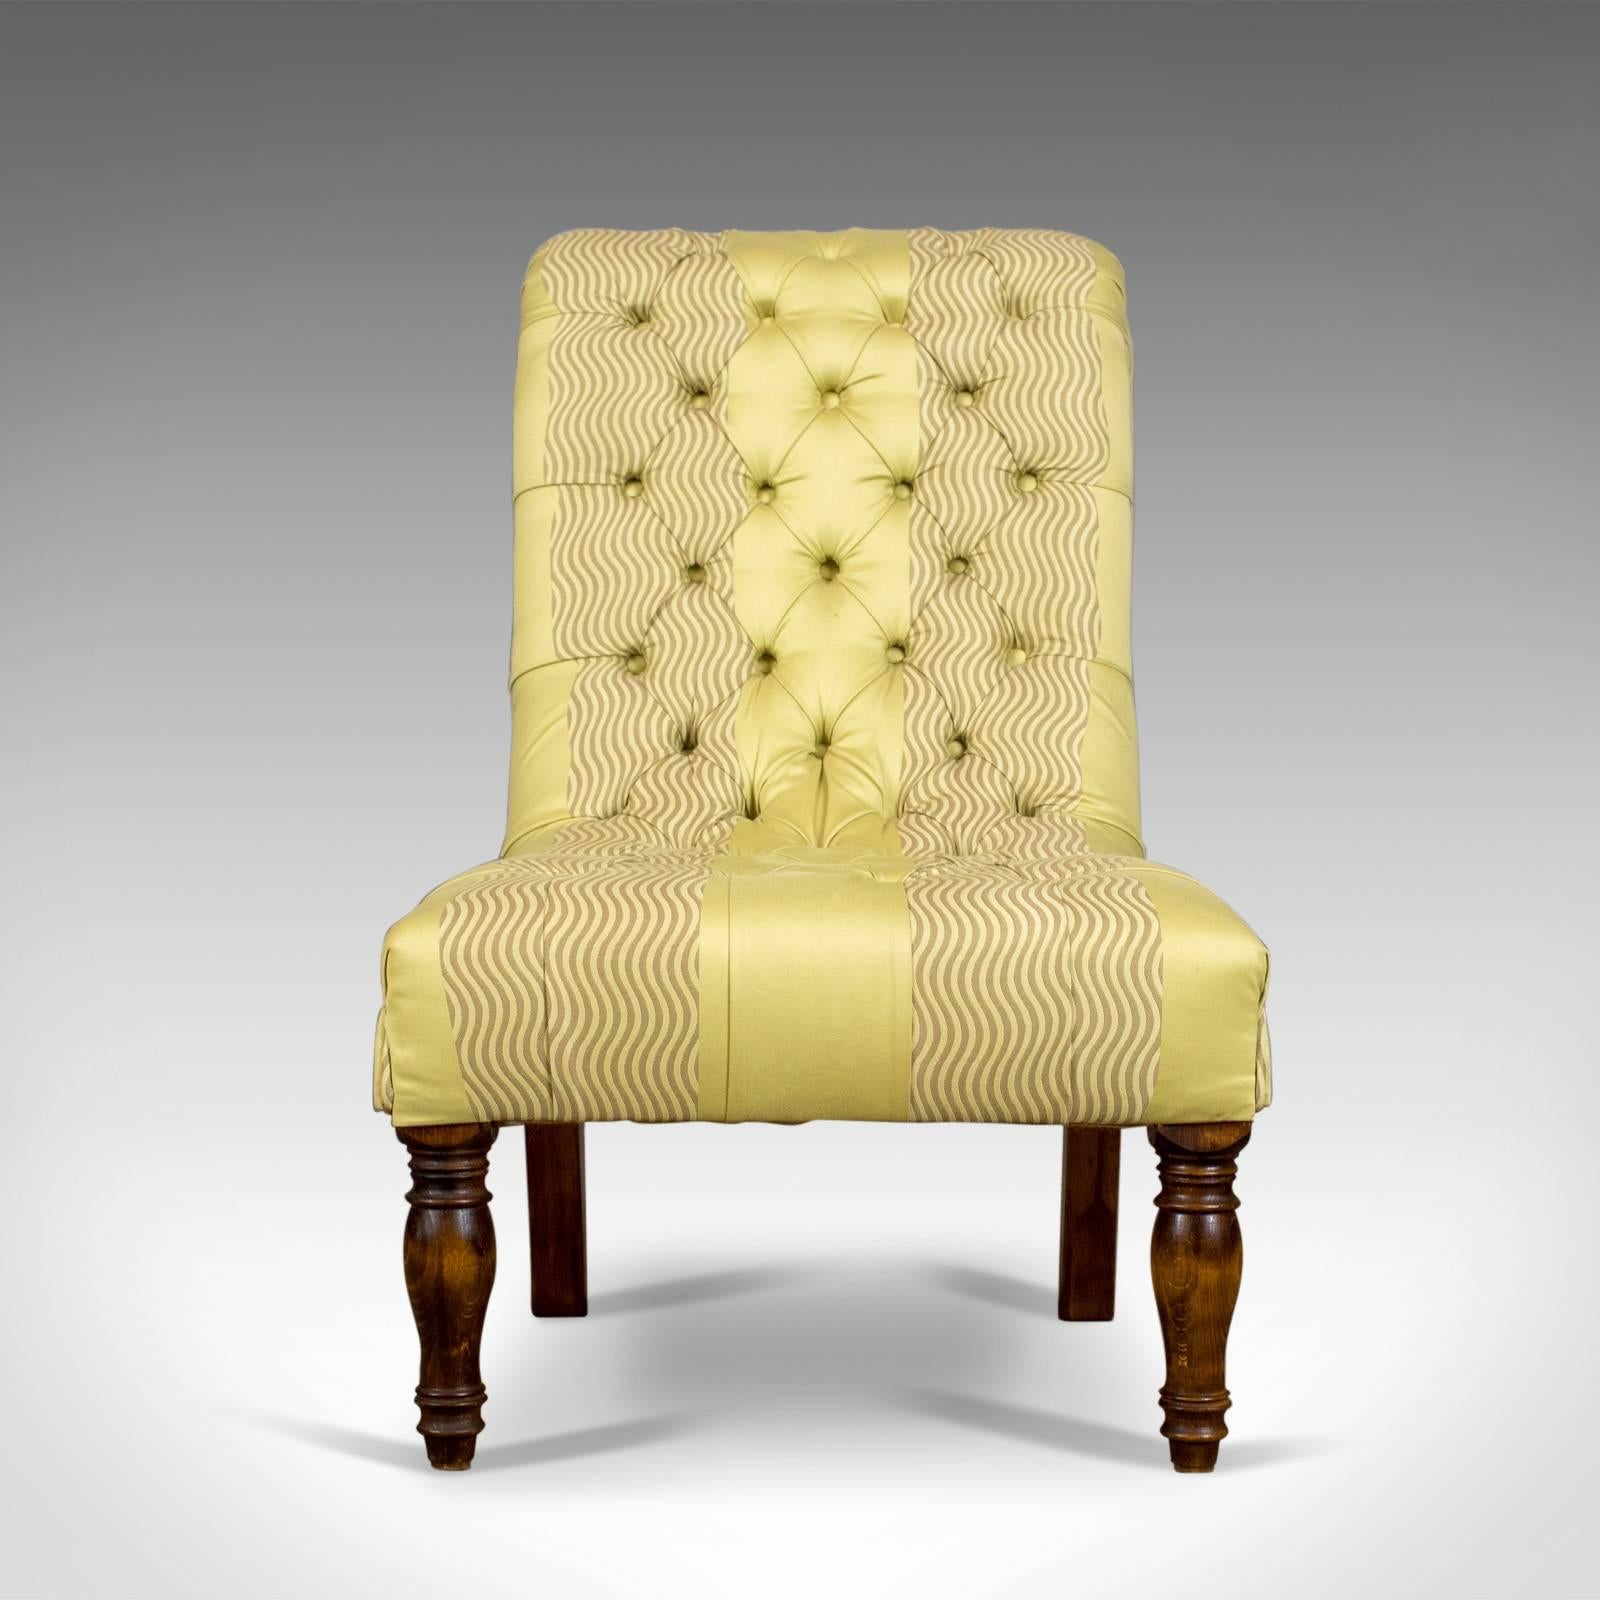 This is an antique salon chair, an English button back bedroom chair dating to the Victorian era, circa 1870.

Attractive sinuous form featuring a rolled, scrolled top
Professionally upholstered in a subtle silk cotton cloth
Traditionally